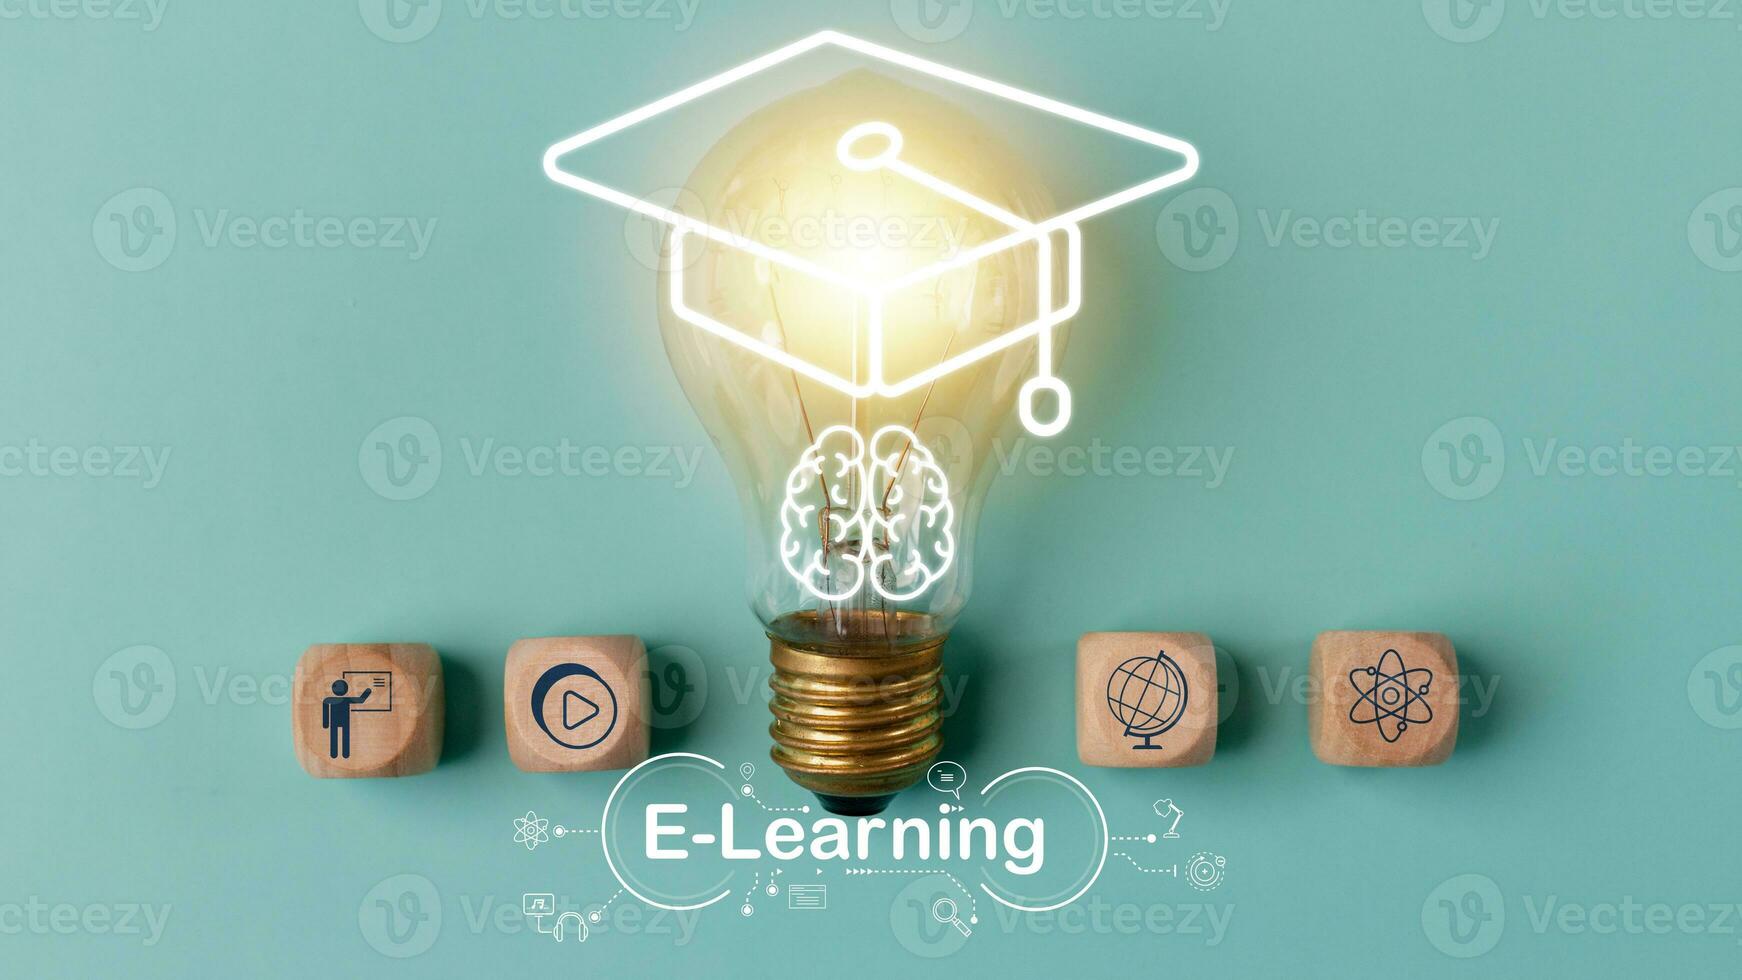 Graduation hat and brain symbols in a light bulb, Internet education course degree, E-learning graduate certificate program concept. study knowledge to creative thinking ideas and problem solving photo